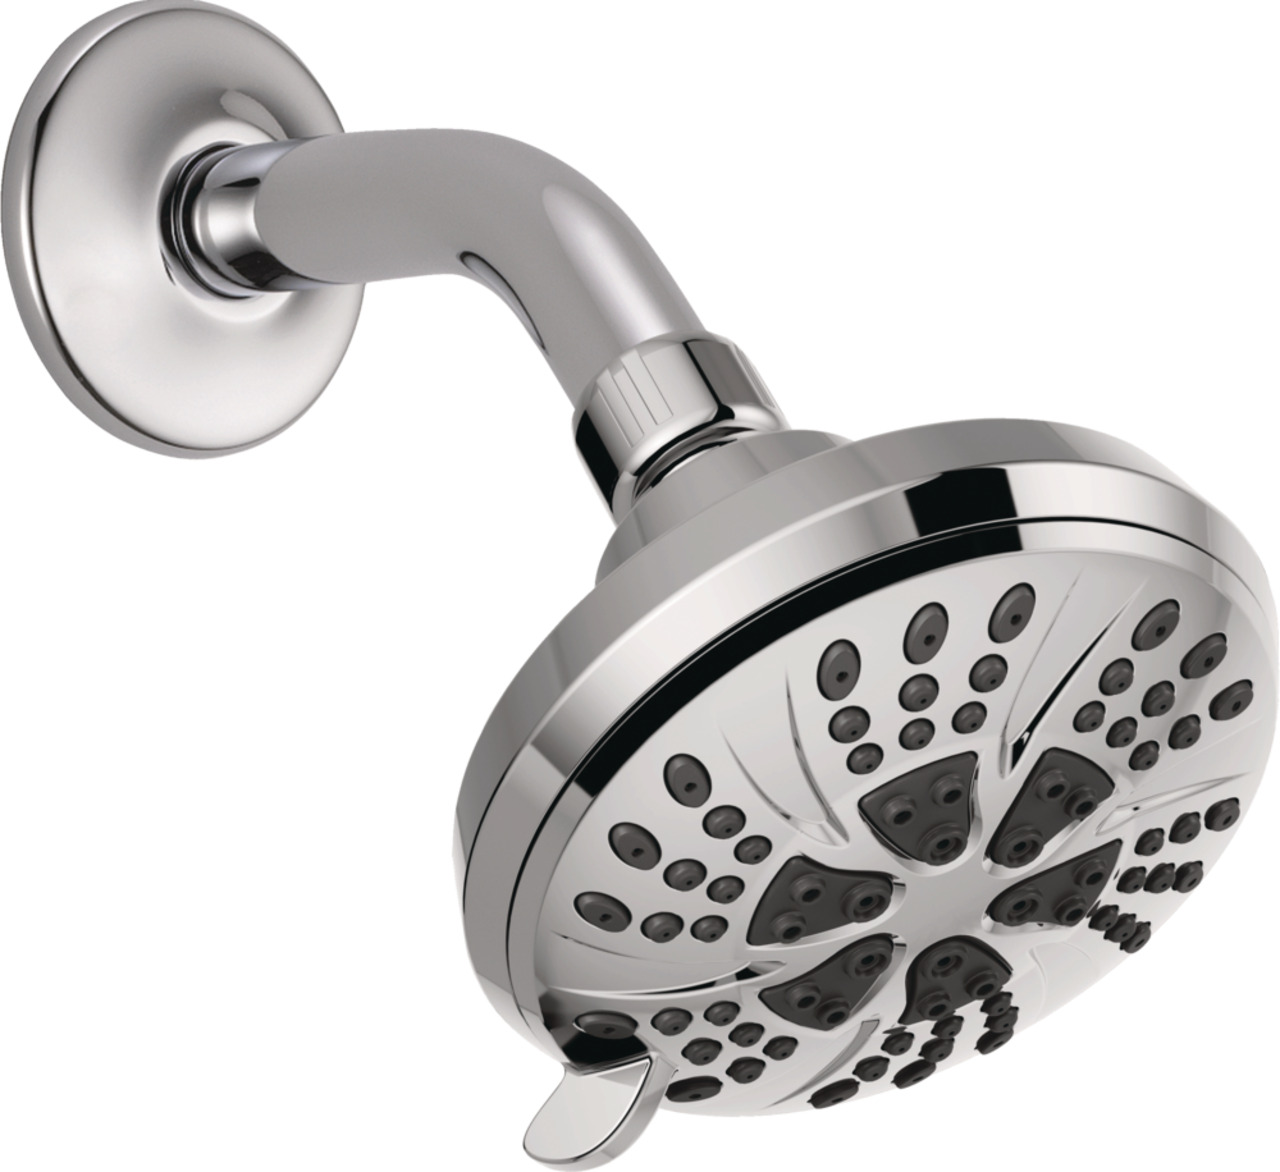 https://media-www.canadiantire.ca/product/fixing/plumbing/faucets-fixtures/0639981/delta-fixed-6-setting-2-5gpm-shower-head-chrome-bbf02789-03bf-4e9e-8f35-3e0519e084ba.png?imdensity=1&imwidth=640&impolicy=mZoom